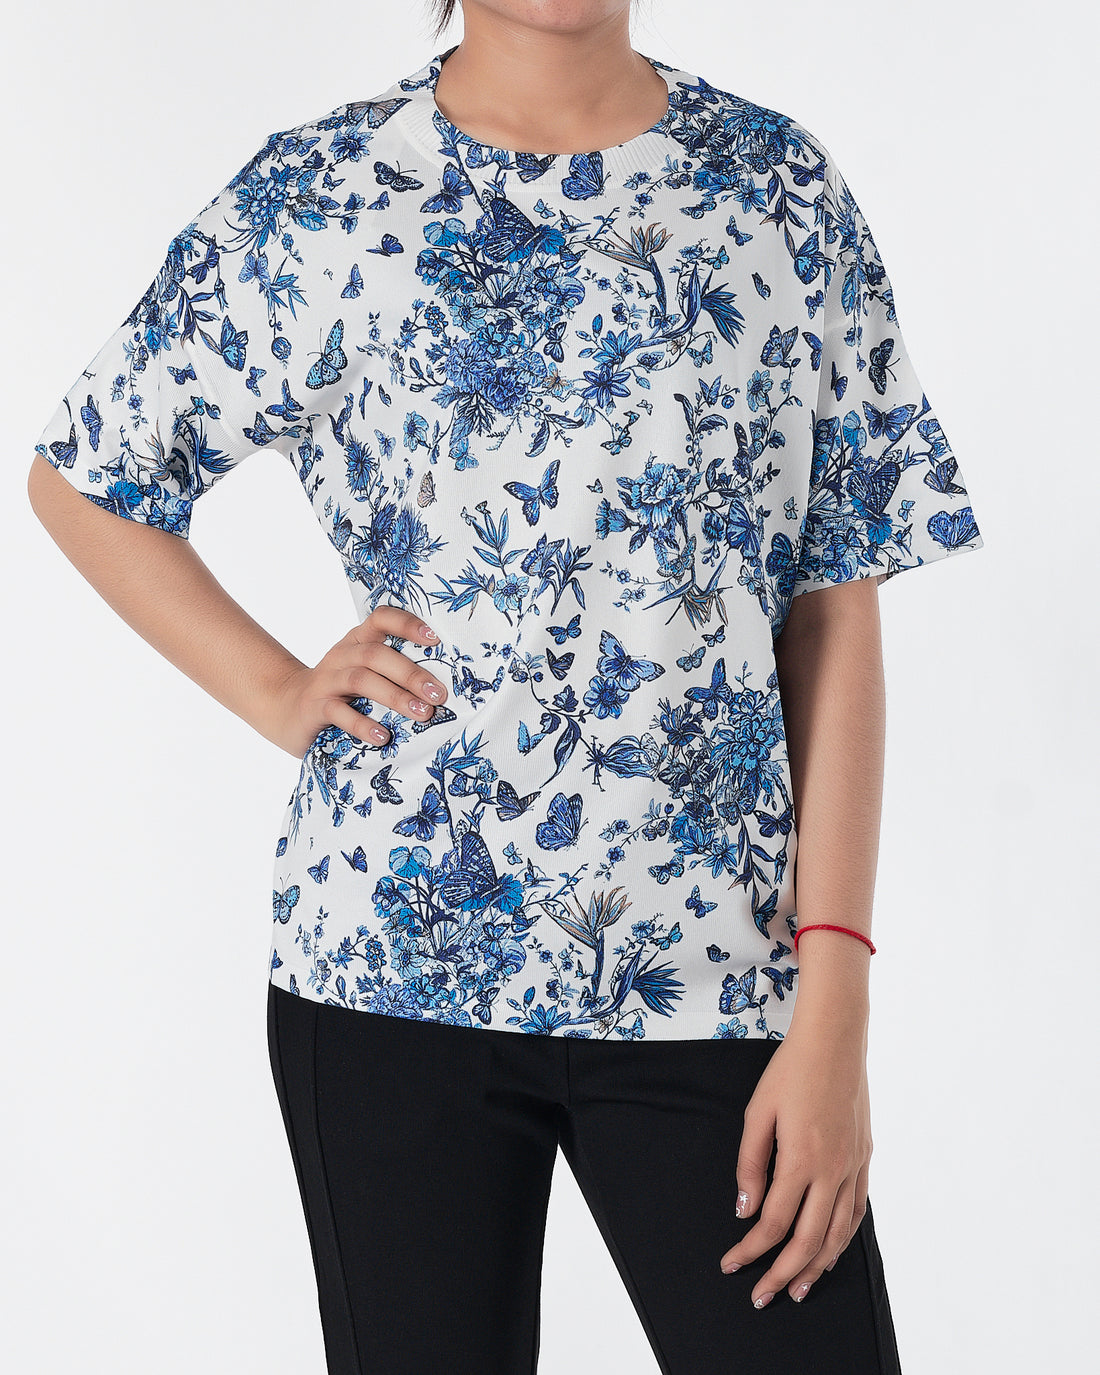 Floral Over Printed Lady Shirt 15.90